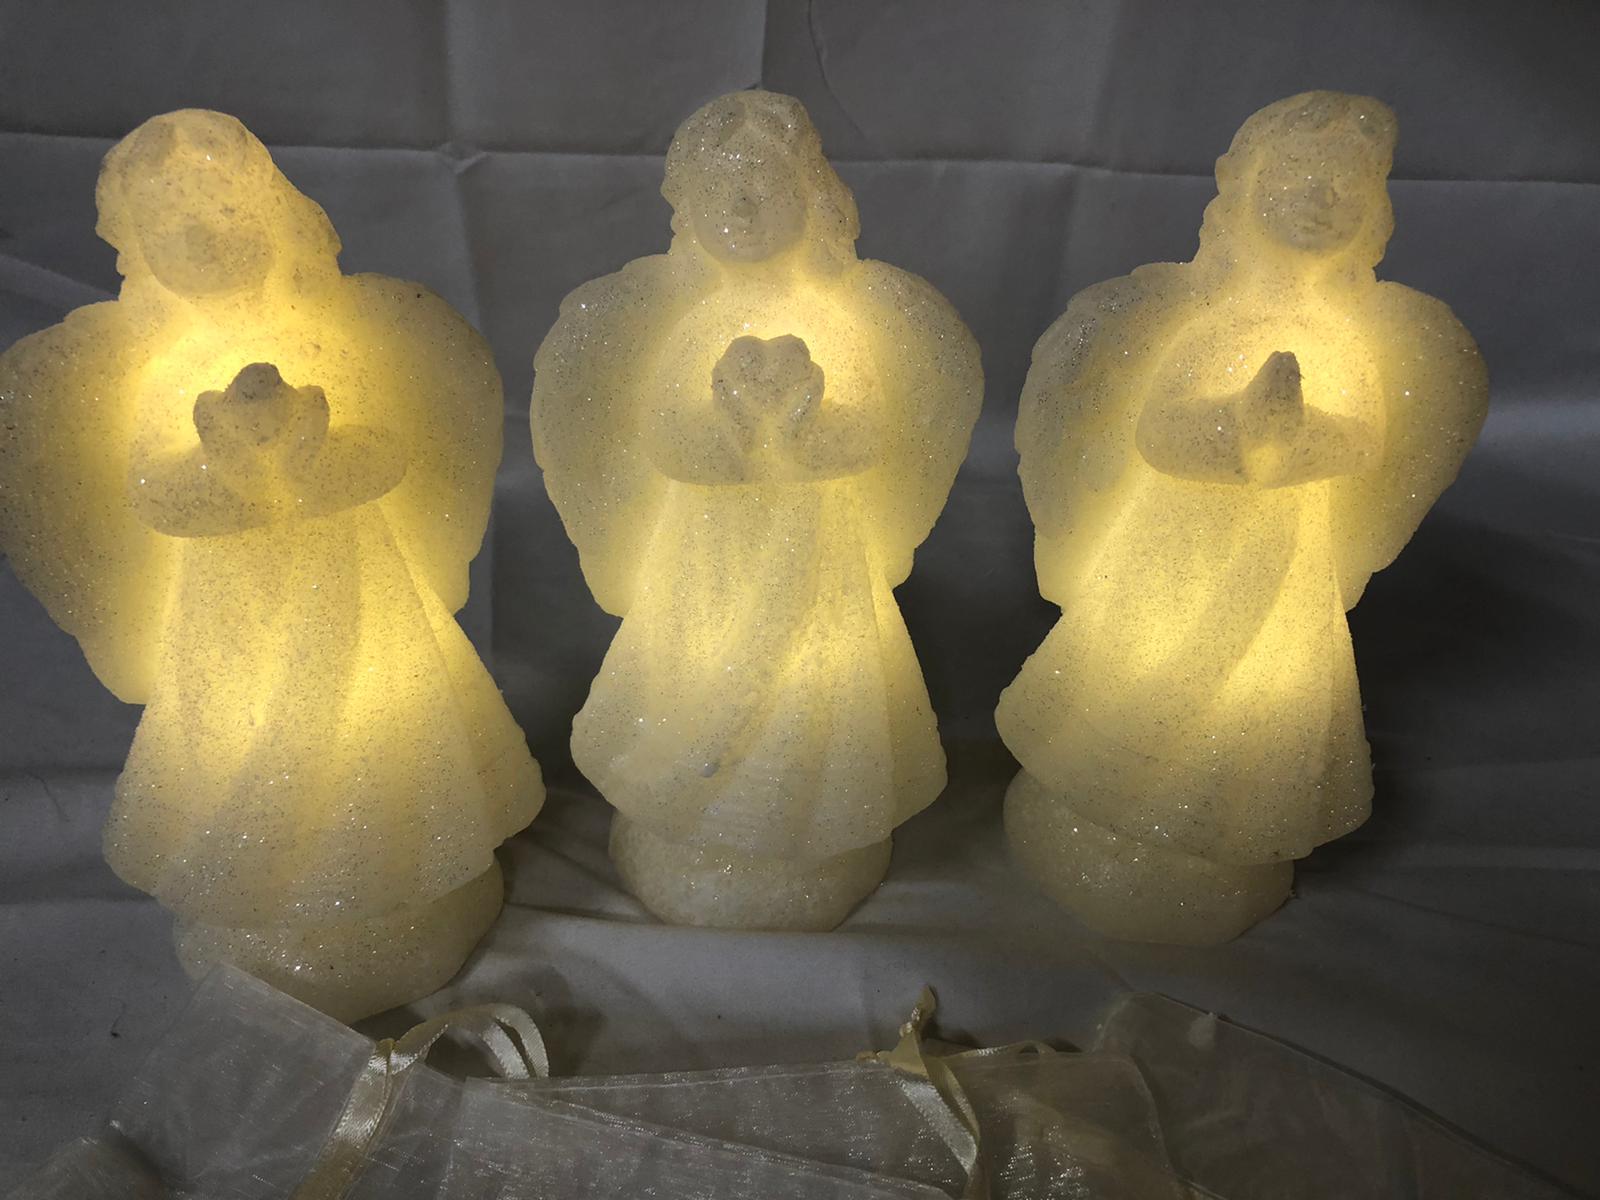 S/3 Illuminated Glittered Wax Angels with Sheer Bags by Valerie